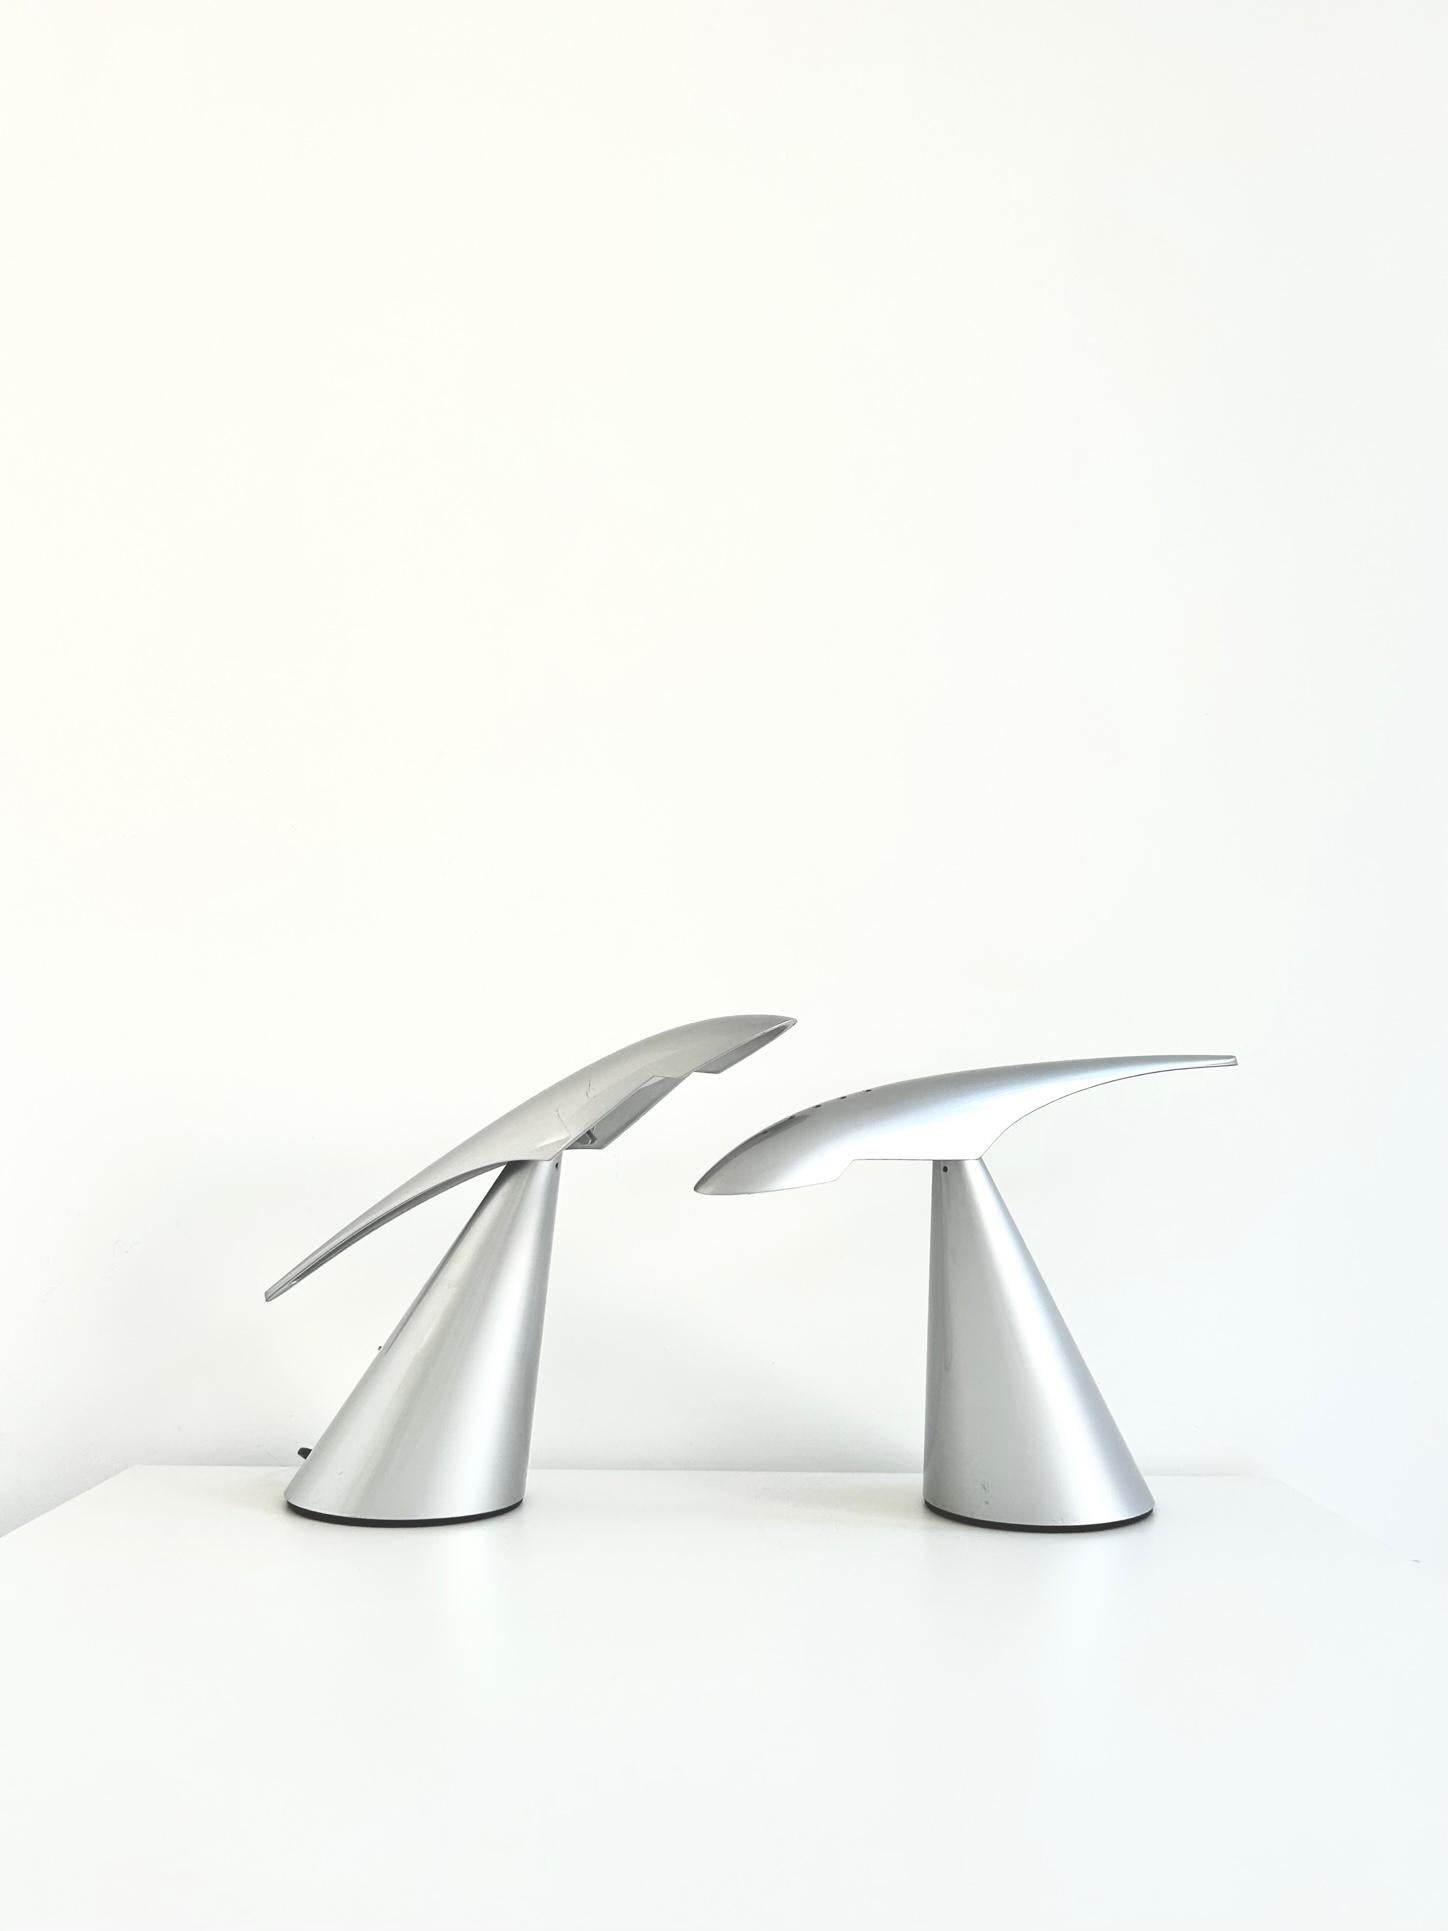 Metal Pair of Ran Desk Lamps, Peter Naumann, ClassiCon, 1990s For Sale